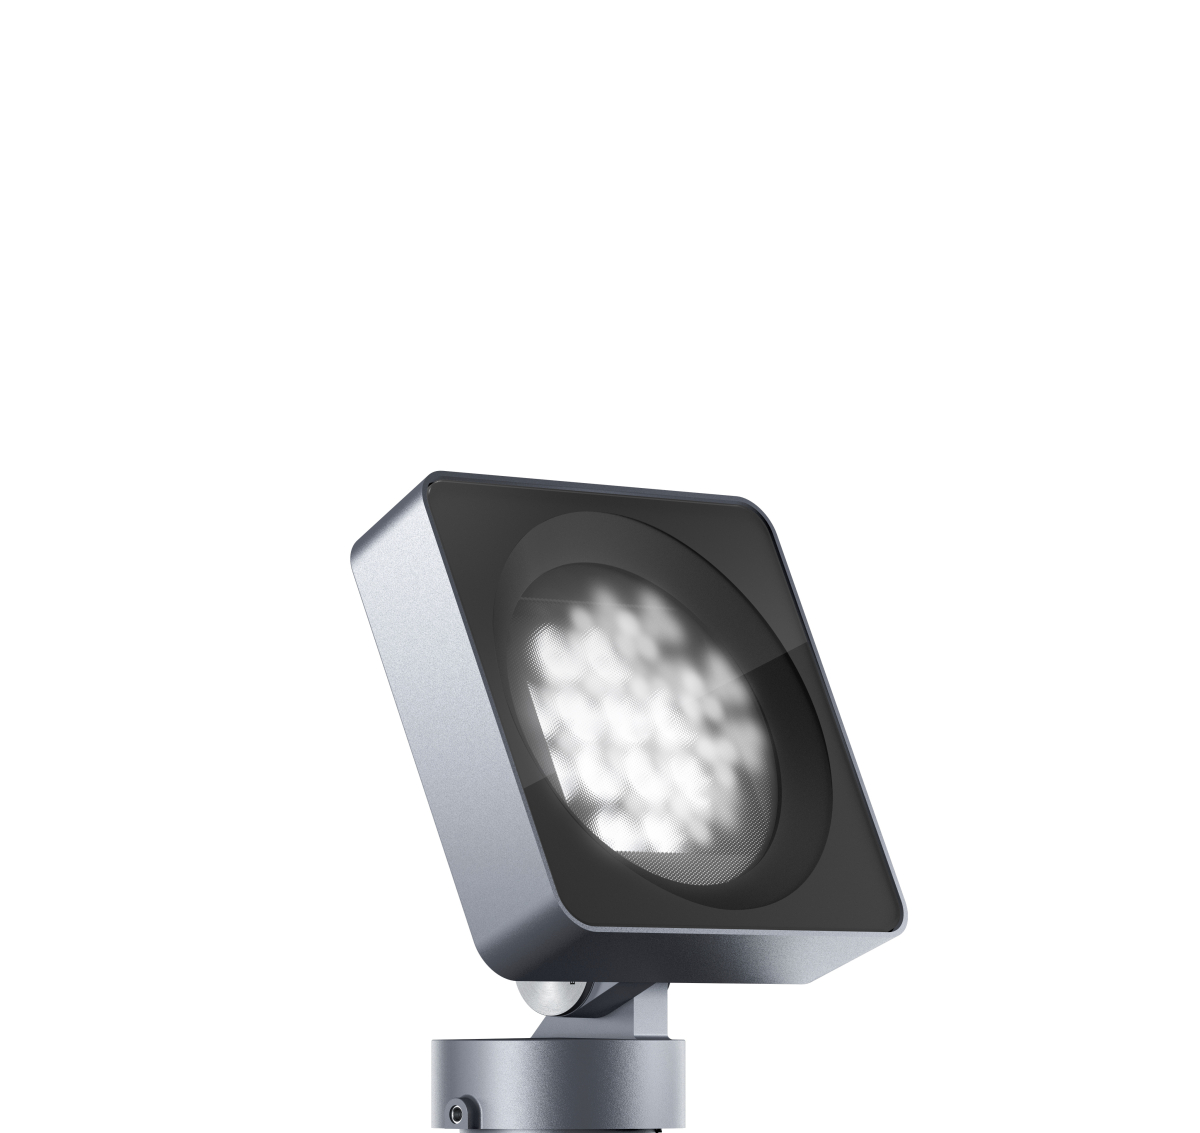 Lightscan IP65 Surf Mtd Floodlight With Mounting Plate Oval Flood Beam 48W LED 4000K DALI Graphit M